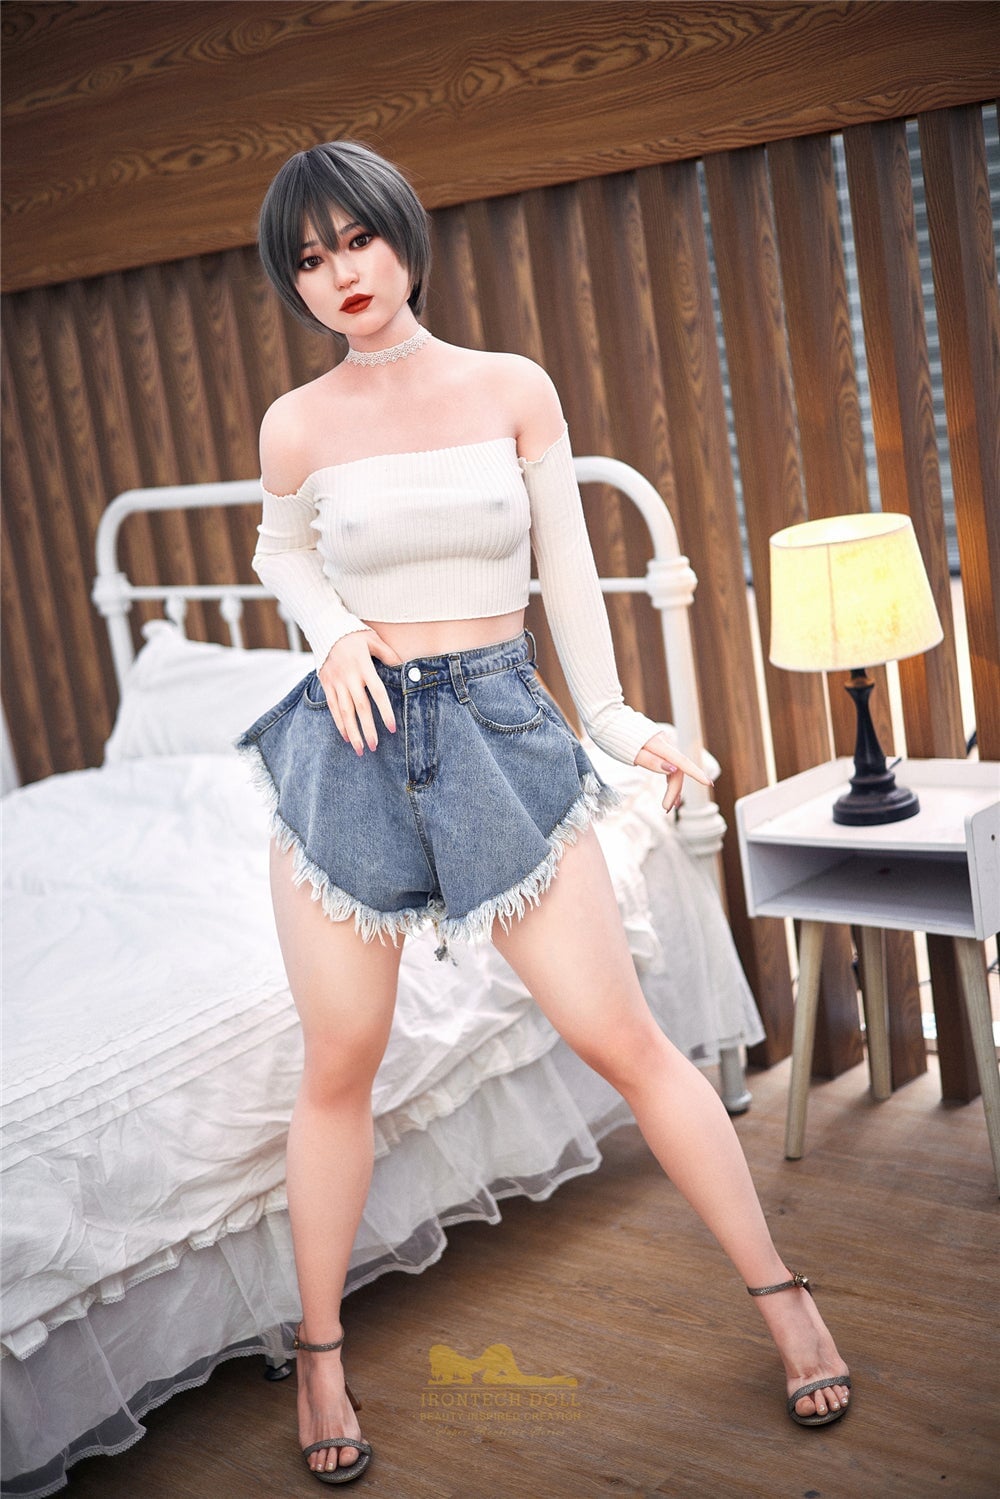 Miko Silicone Sex Doll - IronTech Doll® Irontech Doll®